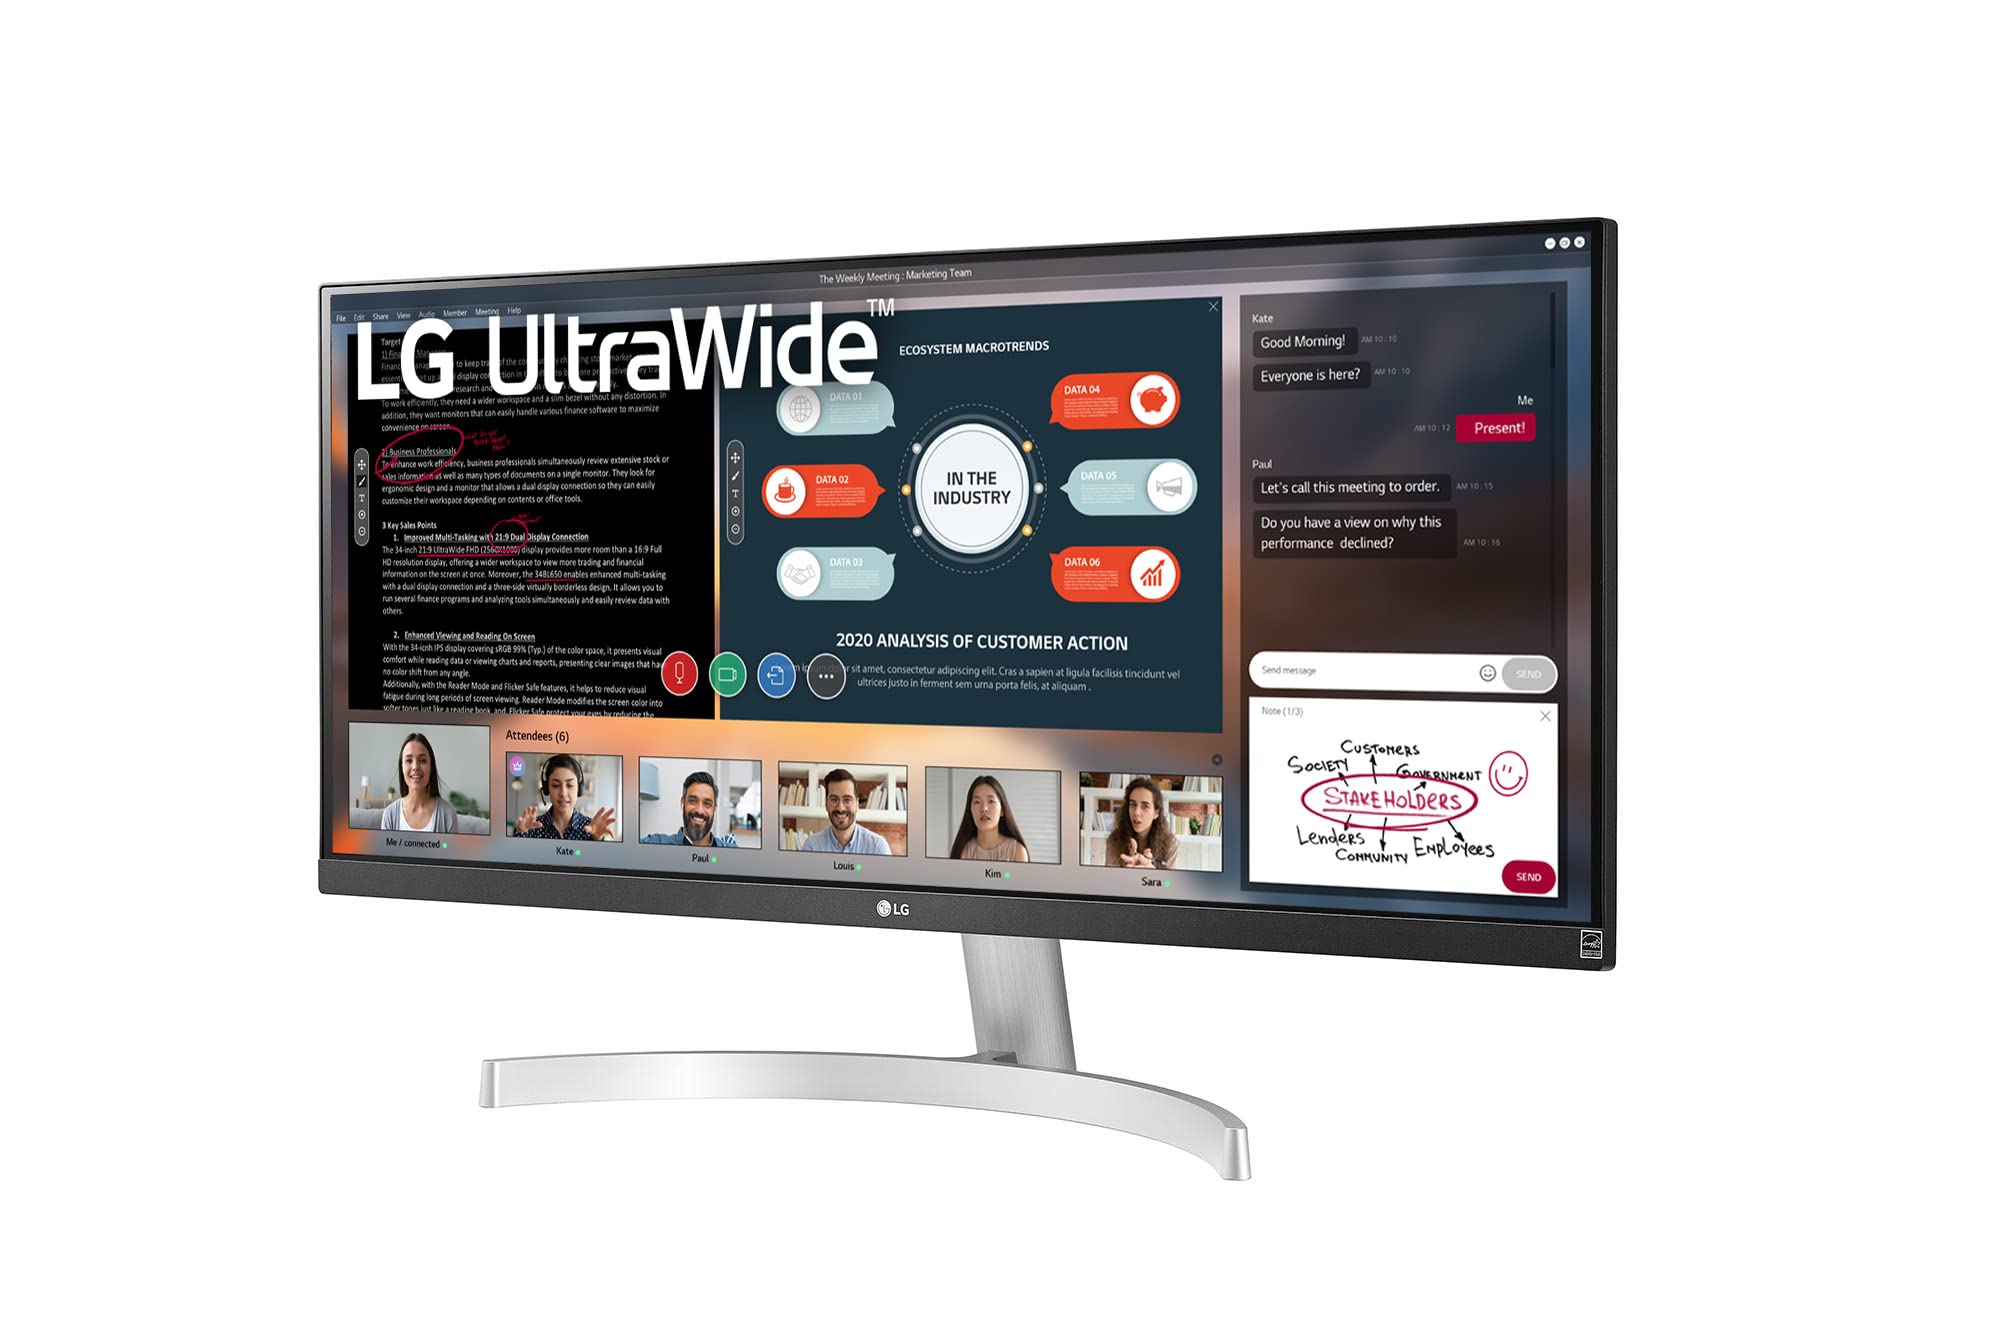 $151.40: 29" LG UltraWide Full HD 75Hz FreeSync IPS Monitor with HDR10